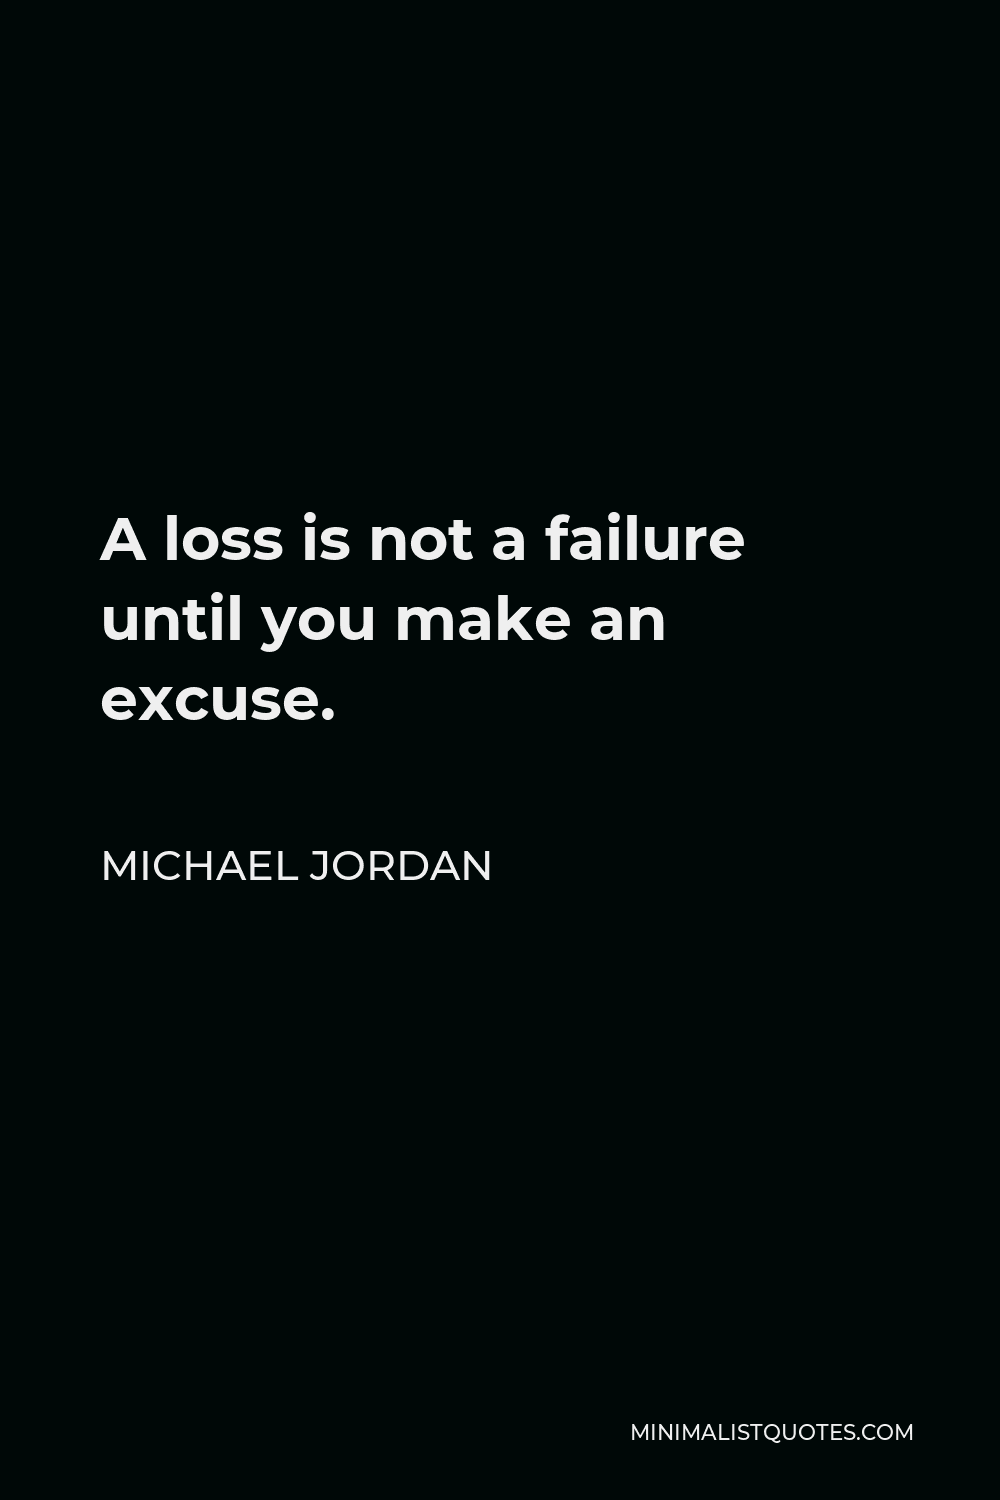 Michael Jordan Quote - A loss is not a failure until you make an excuse.